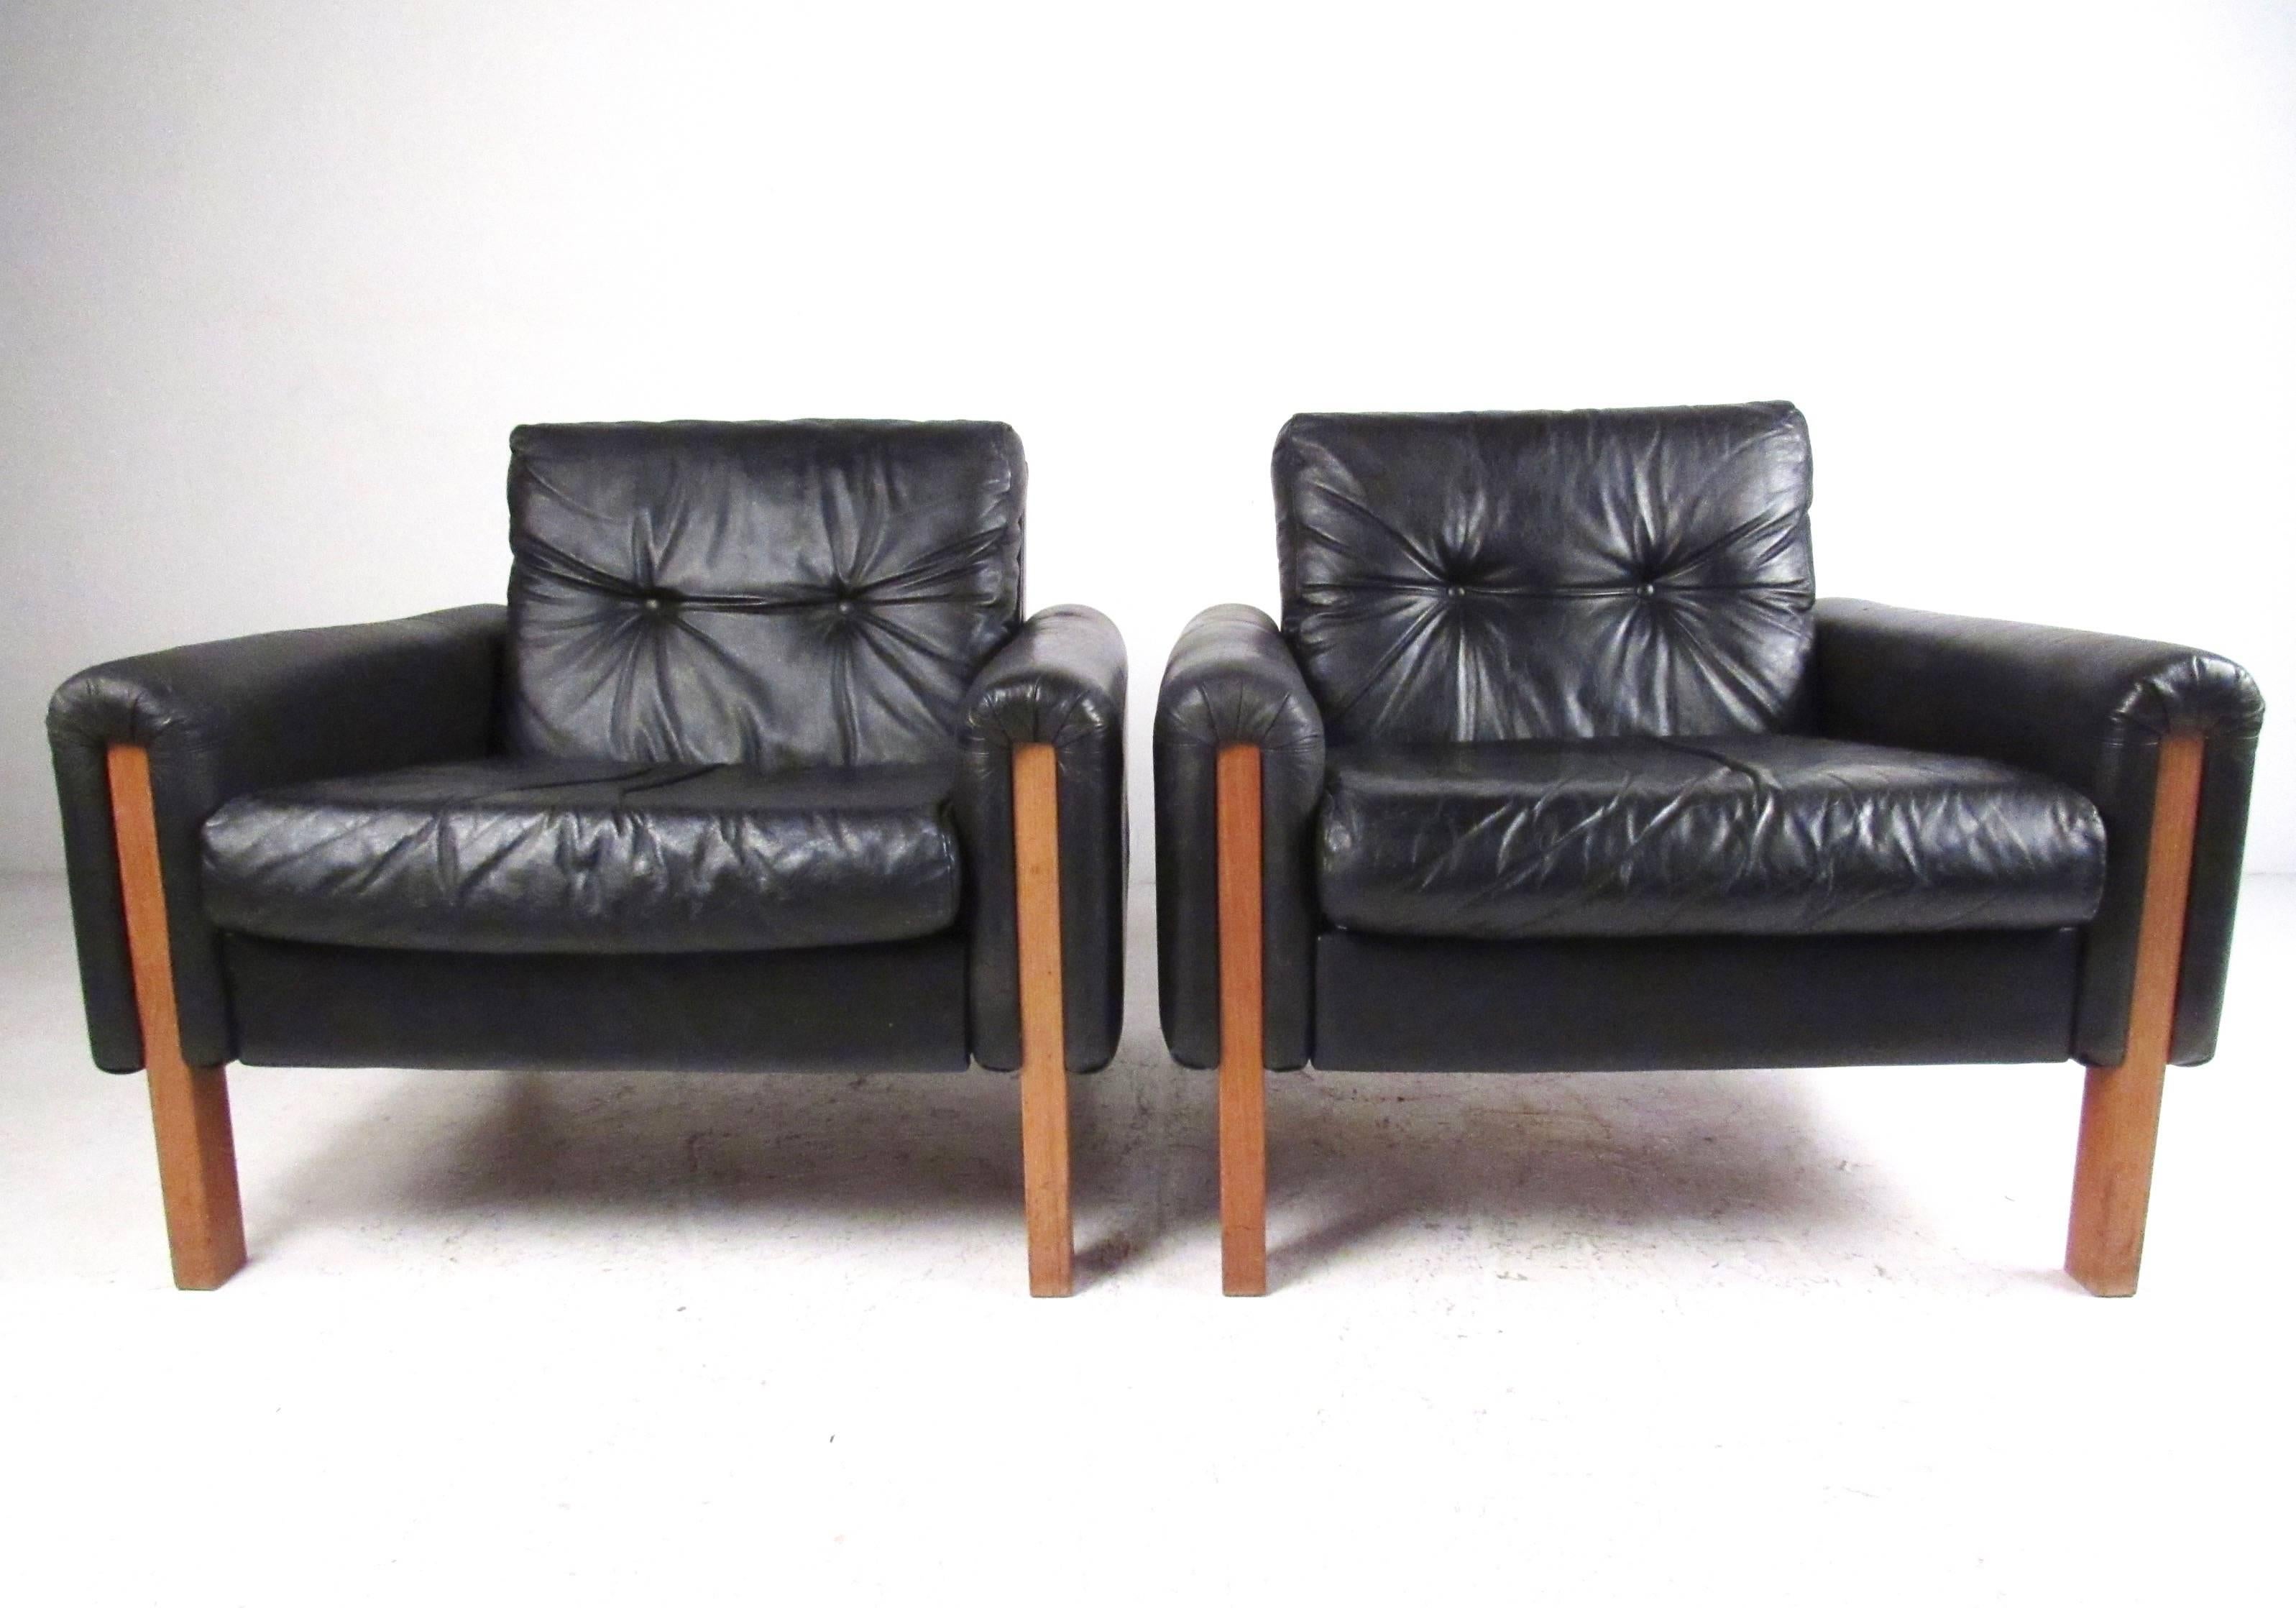 This beautiful pair of vintage armchairs makes for a stylish and comfortable addition to any seating arrangement. Tufted black leather upholstery is nicely complimented by hardwood legs and unique mid-century design by Stendig Inc. Please confirm